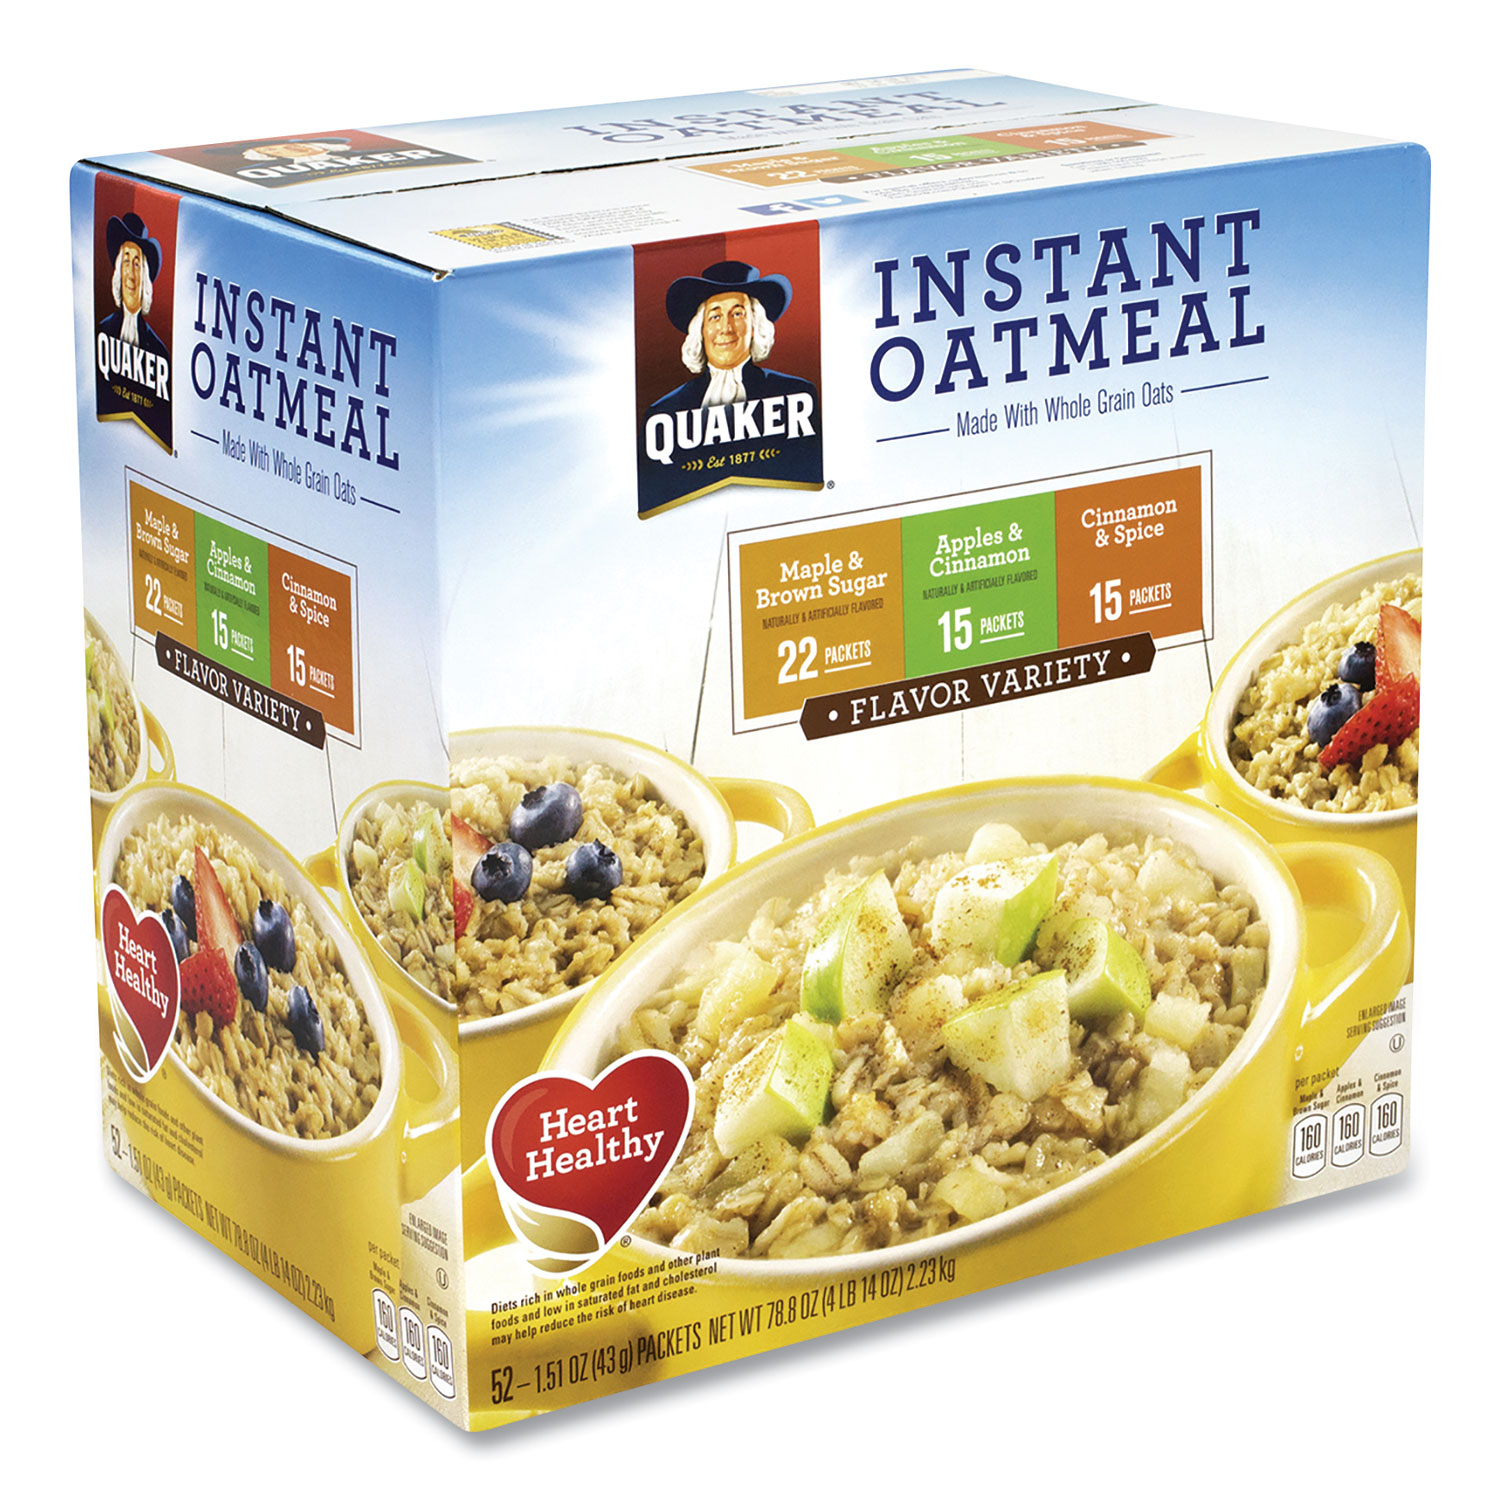  Quaker 26298 Instant Oatmeal, Assorted Varieties, 1.51 oz Envelope, 52/Carton, Free Delivery in 1-4 Business Days (GRR22000482) 